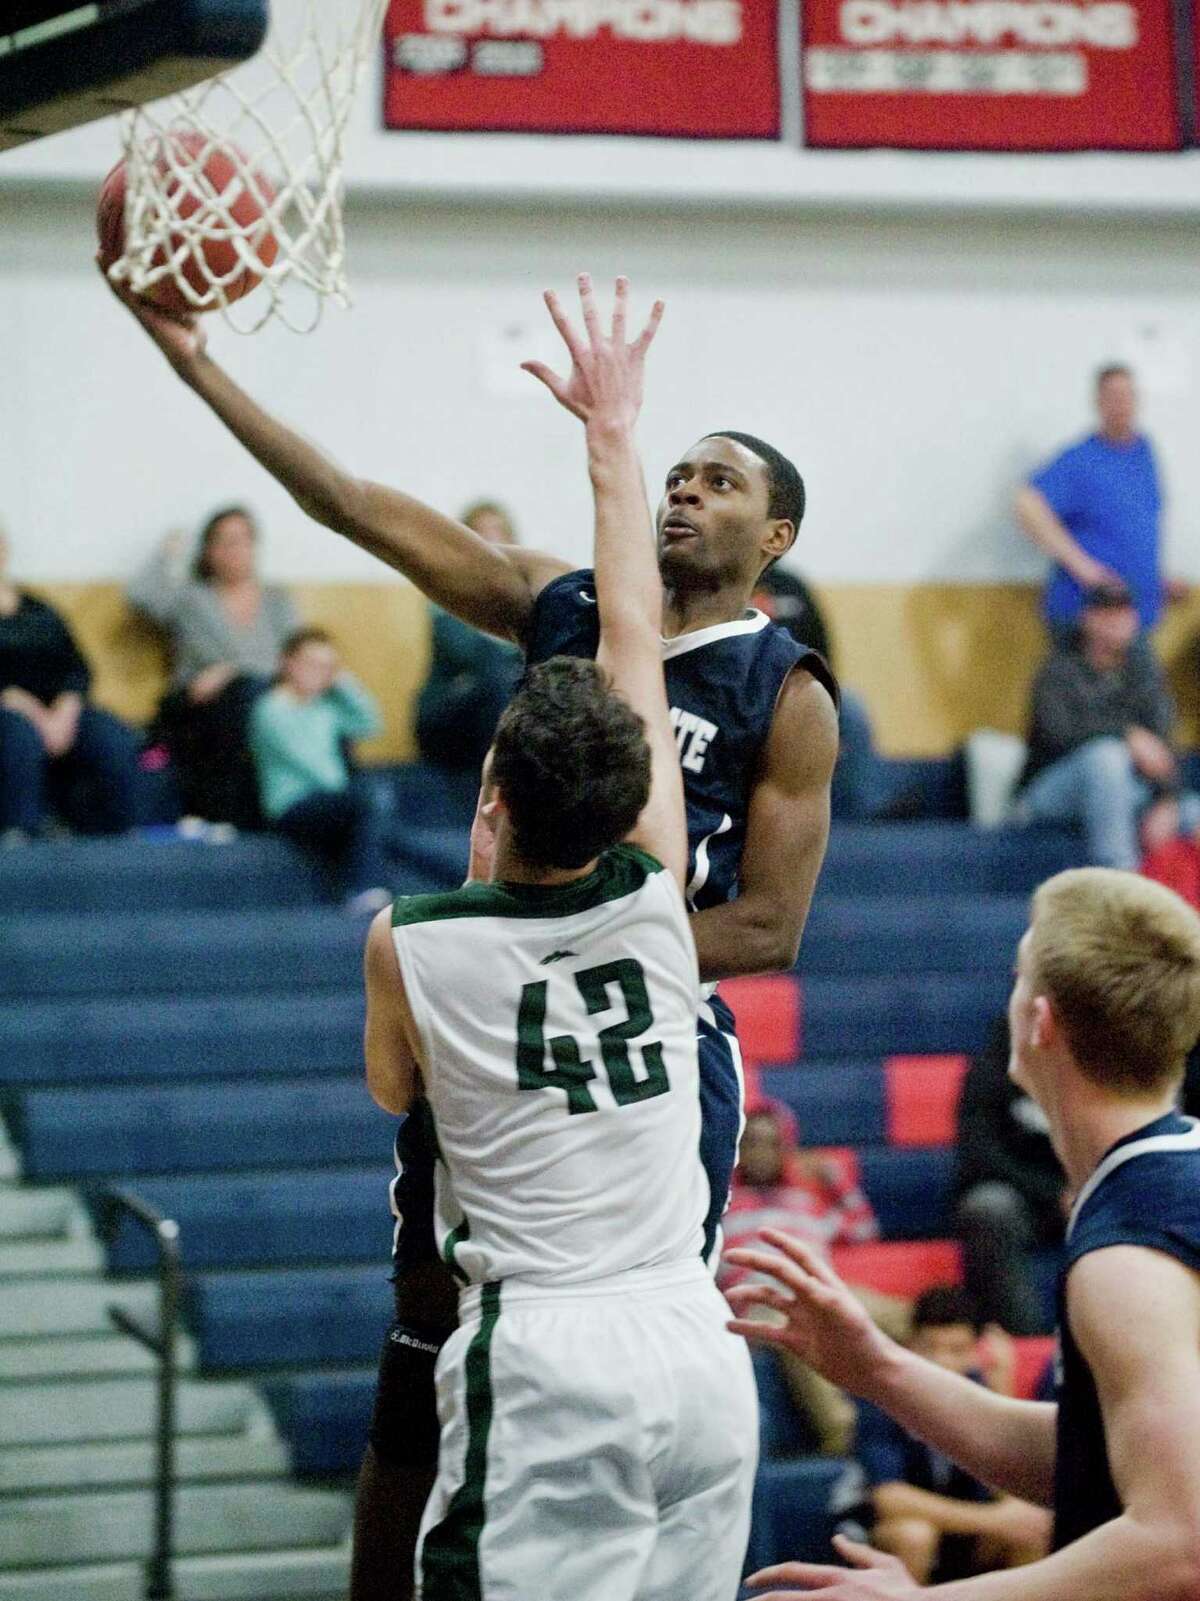 Immaculate High School's Darius Hunter goes to the basket in the Candlewood Classic boys basketball tournament against New Milford High School, played at New Fairfield High School. Saturday, Dec. 26, 2015